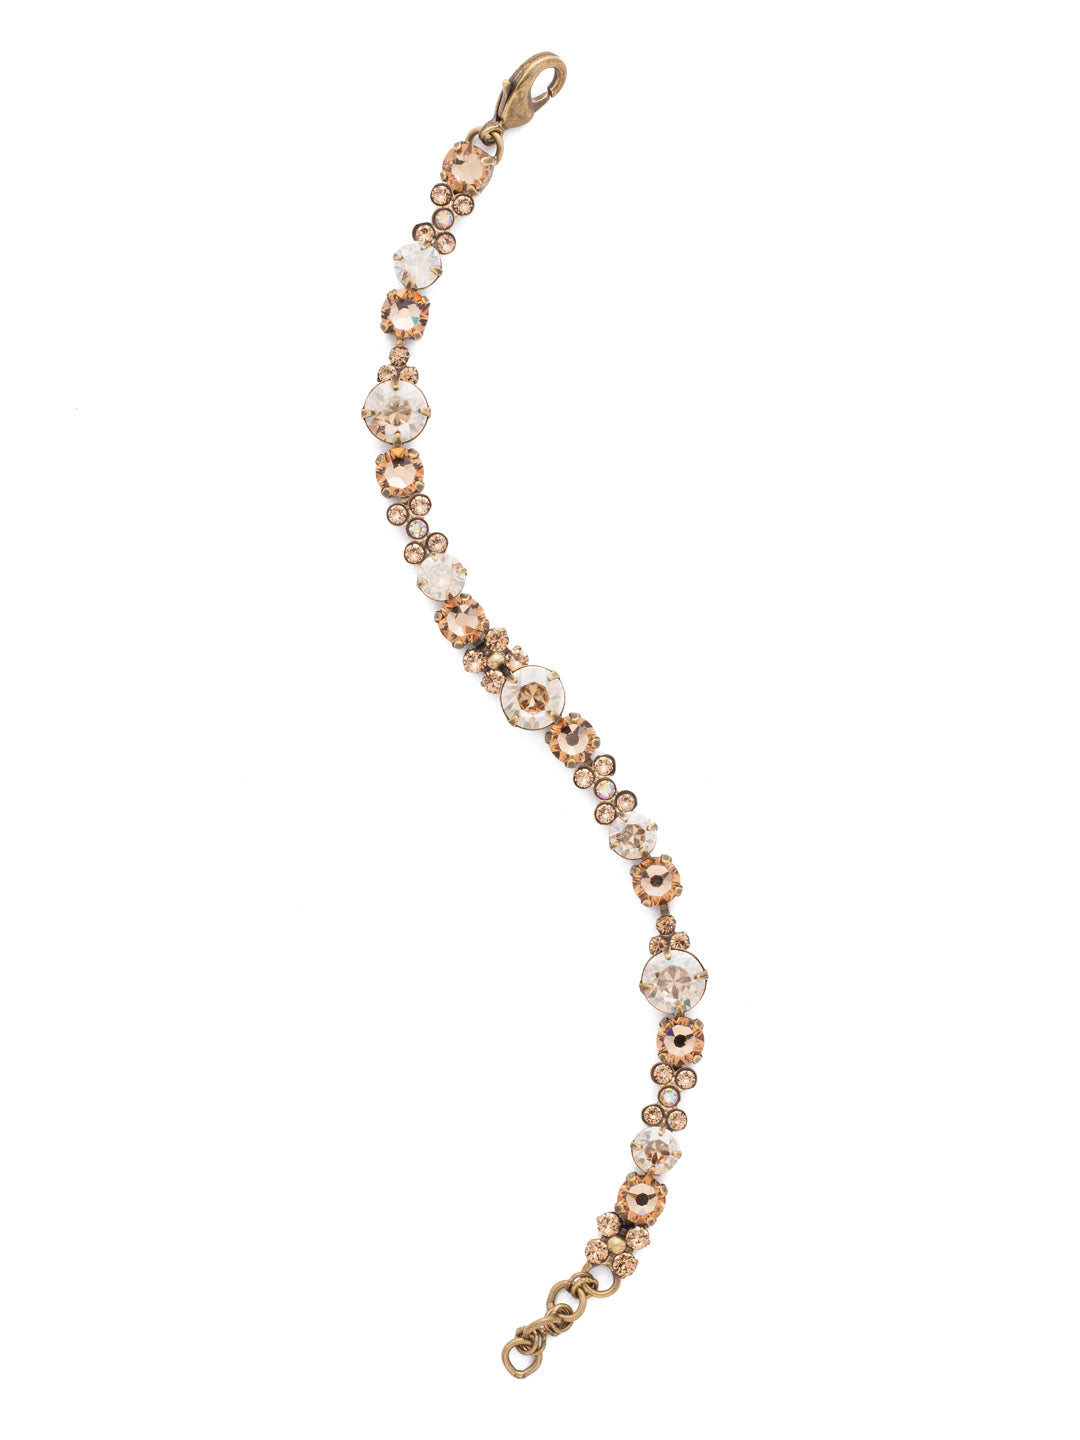 Well-Rounded Bracelet - BDK10AGNT - <p>Large circular gems form a centerpiece for more dainty and delicate round cut crystals on a classic line frame. From Sorrelli's Neutral Territory collection in our Antique Gold-tone finish.</p>